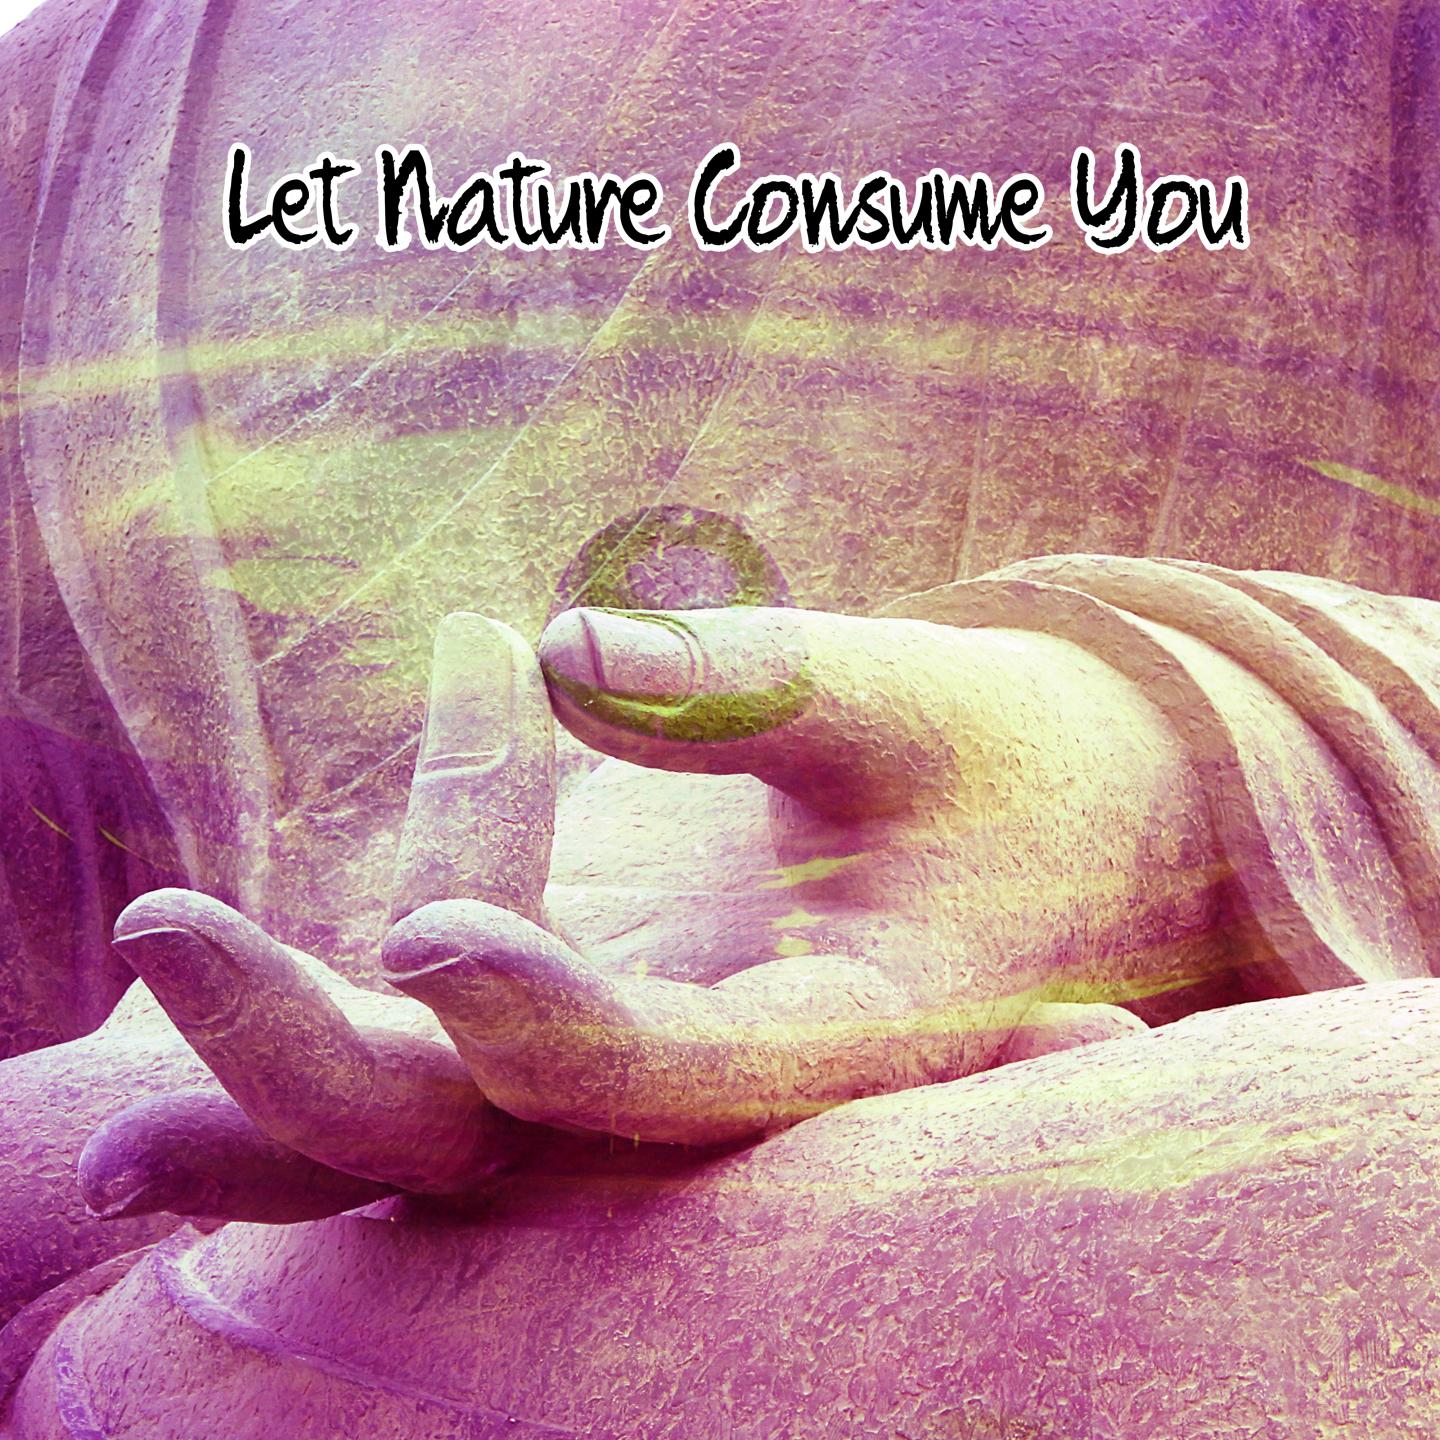 Let Nature Consume You